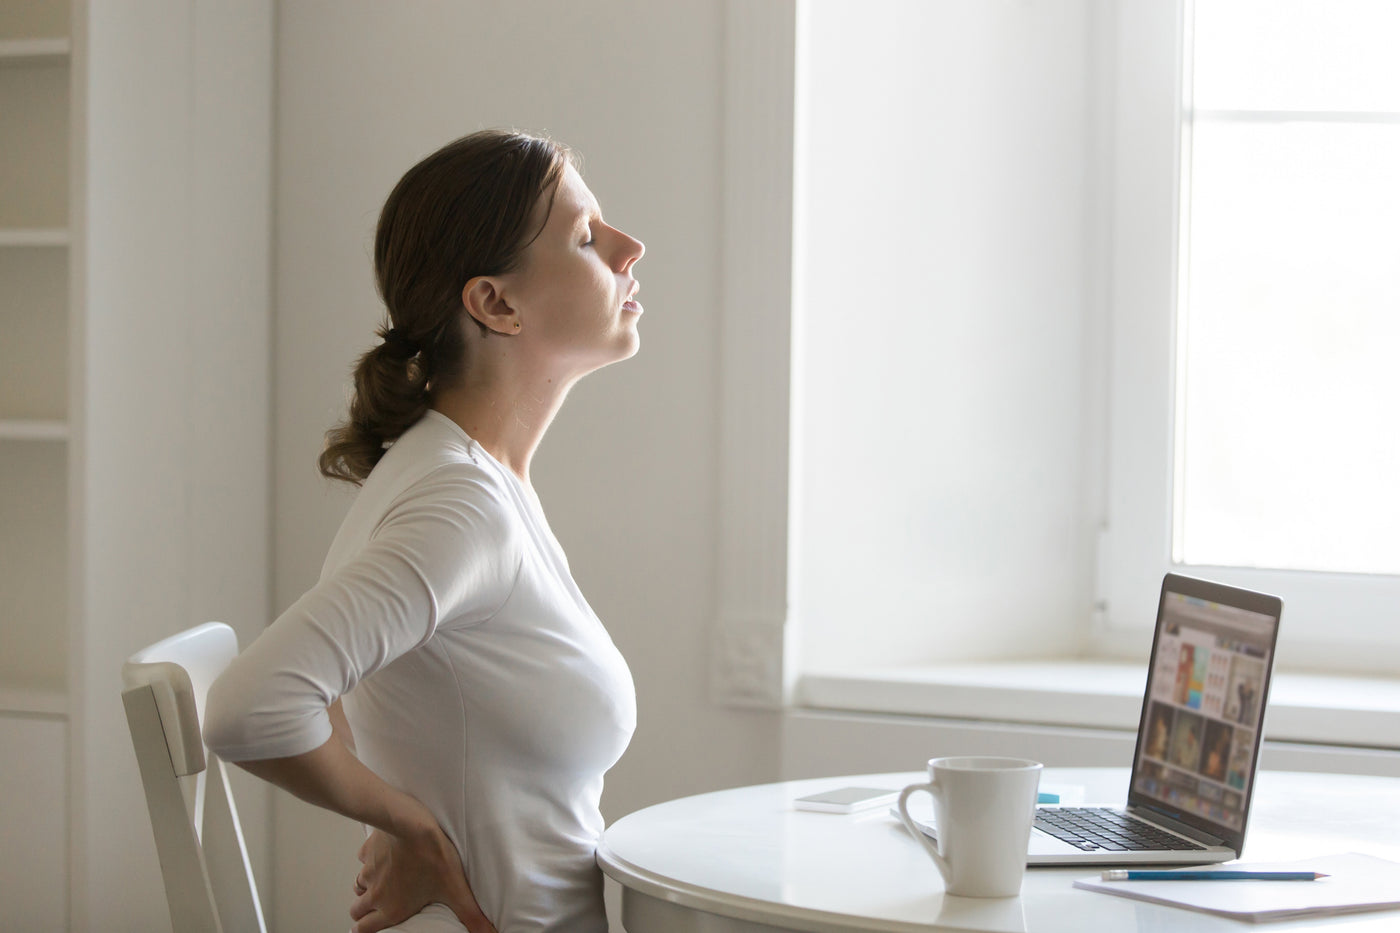 Best seat cushions for back pain if you're working from home